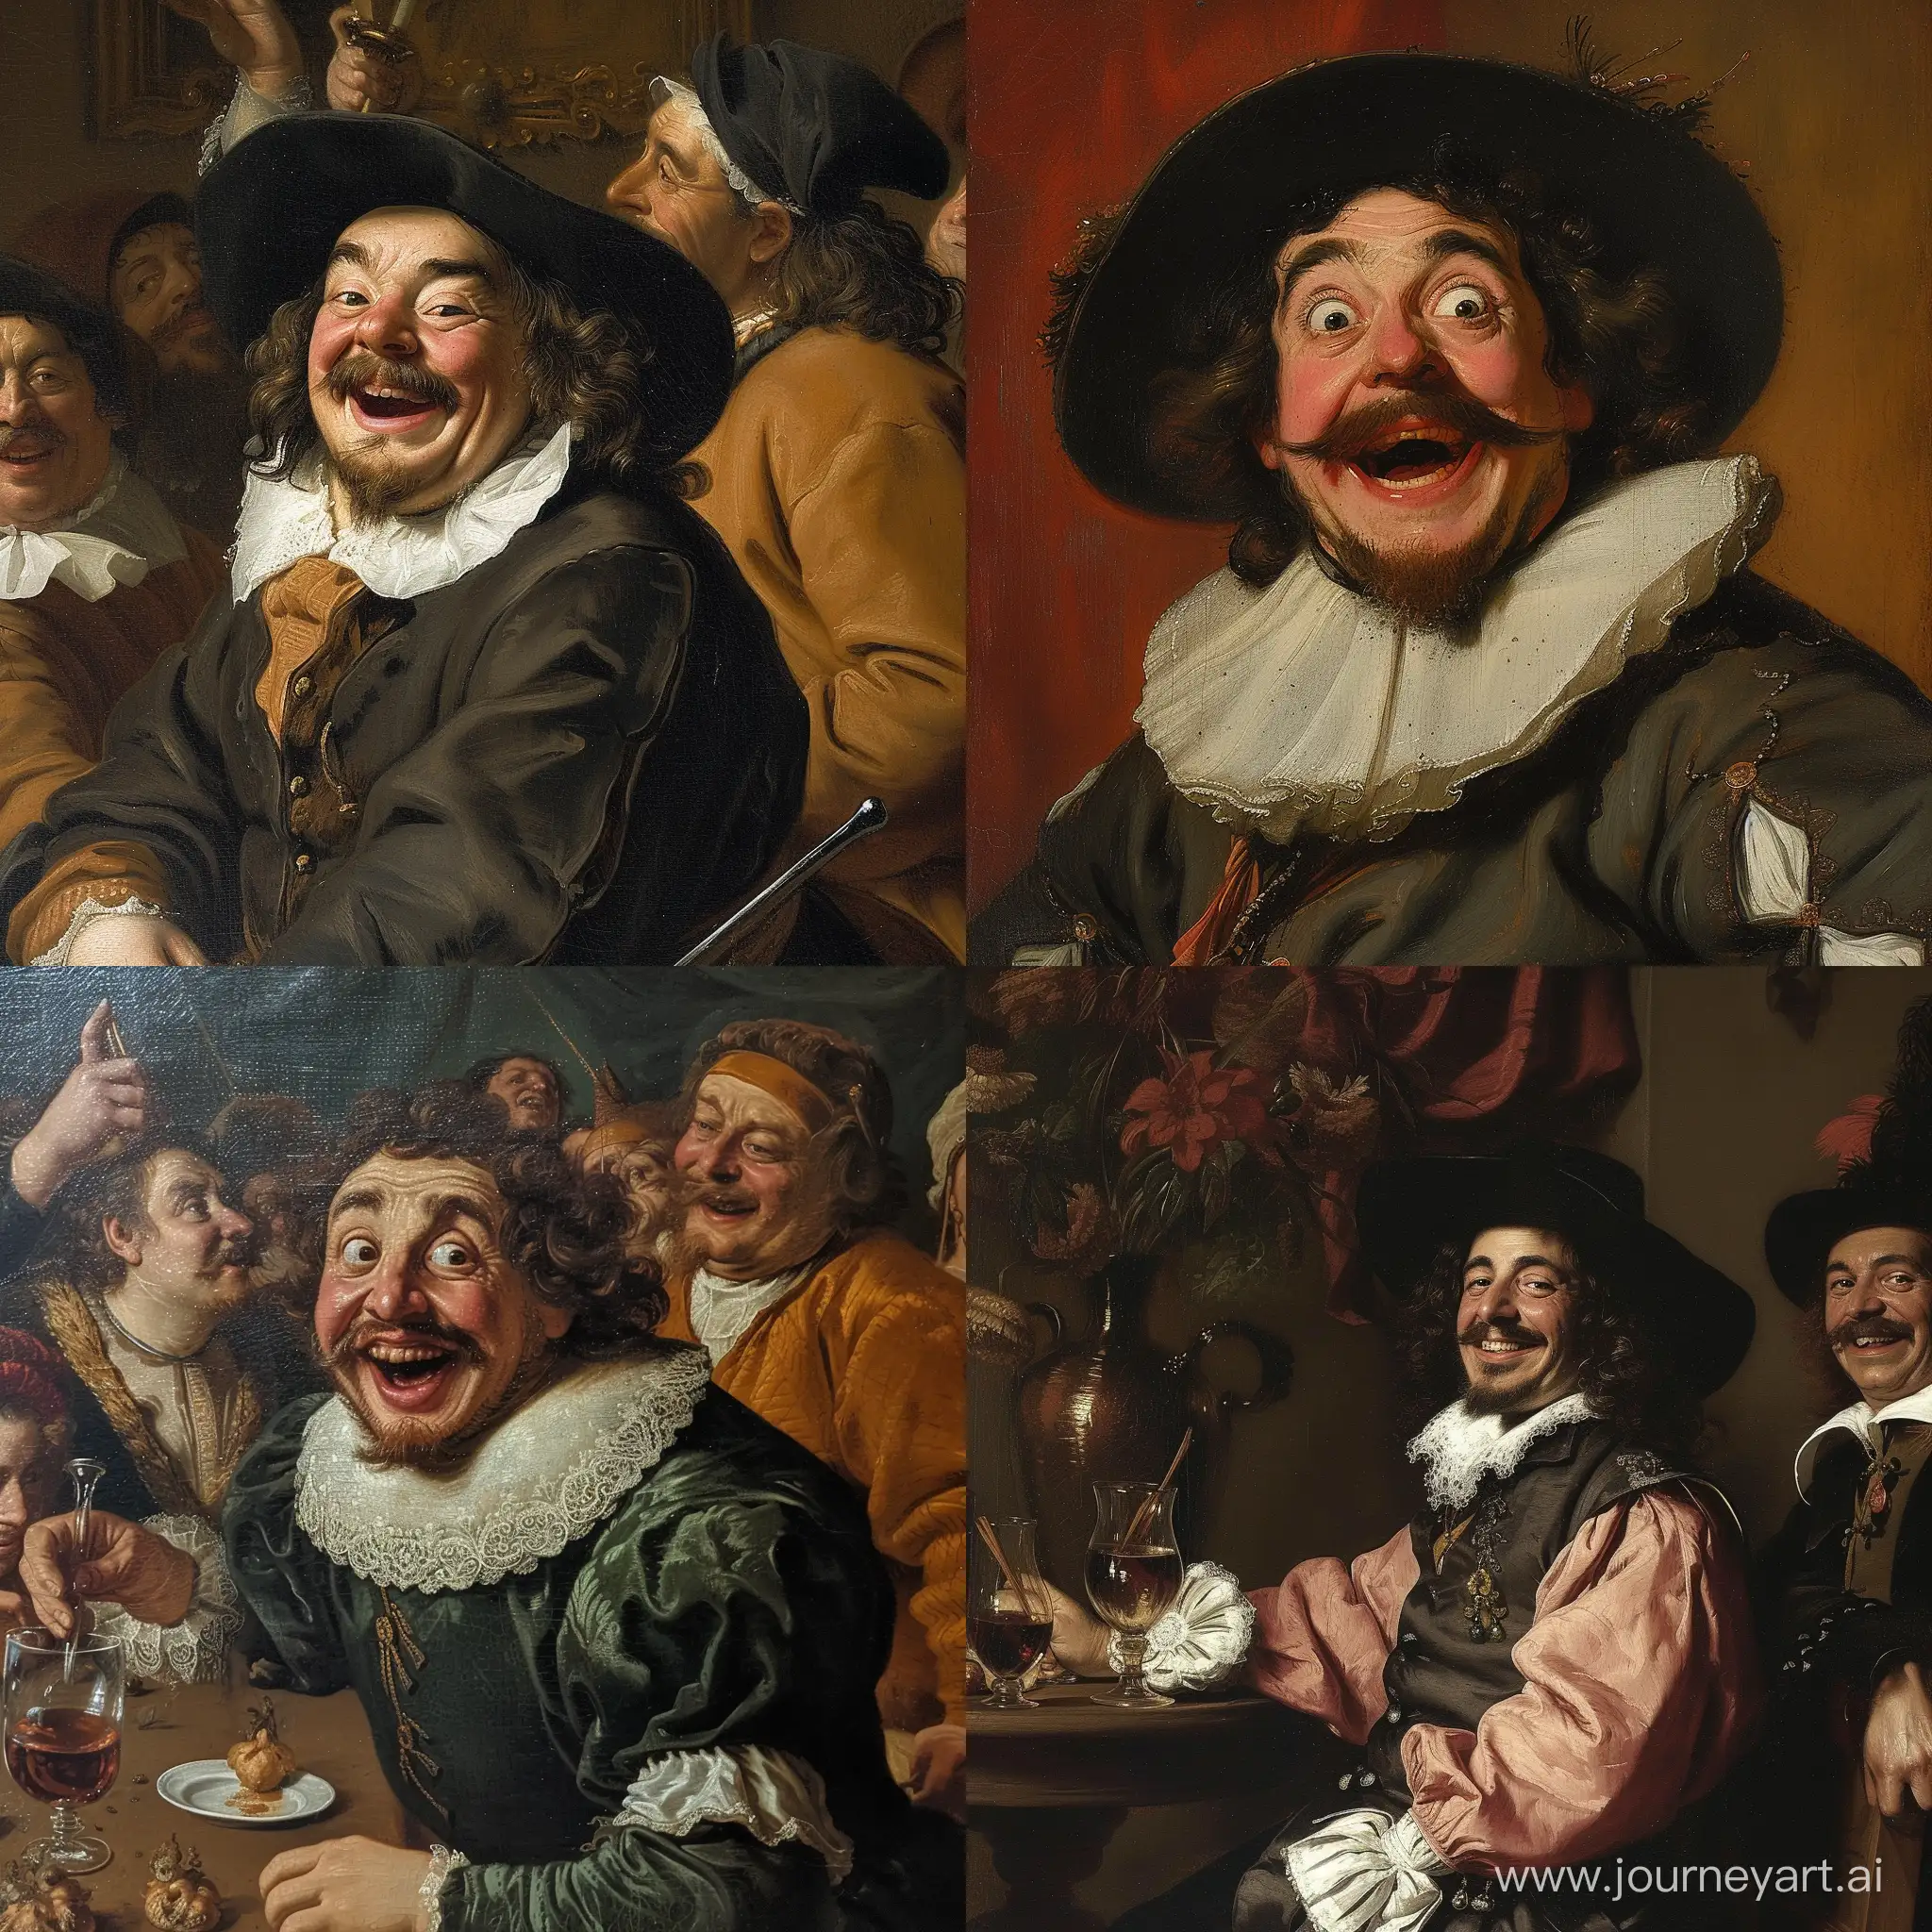 17th-Century-Humor-Meme-Classic-Laughter-in-a-Modern-Format